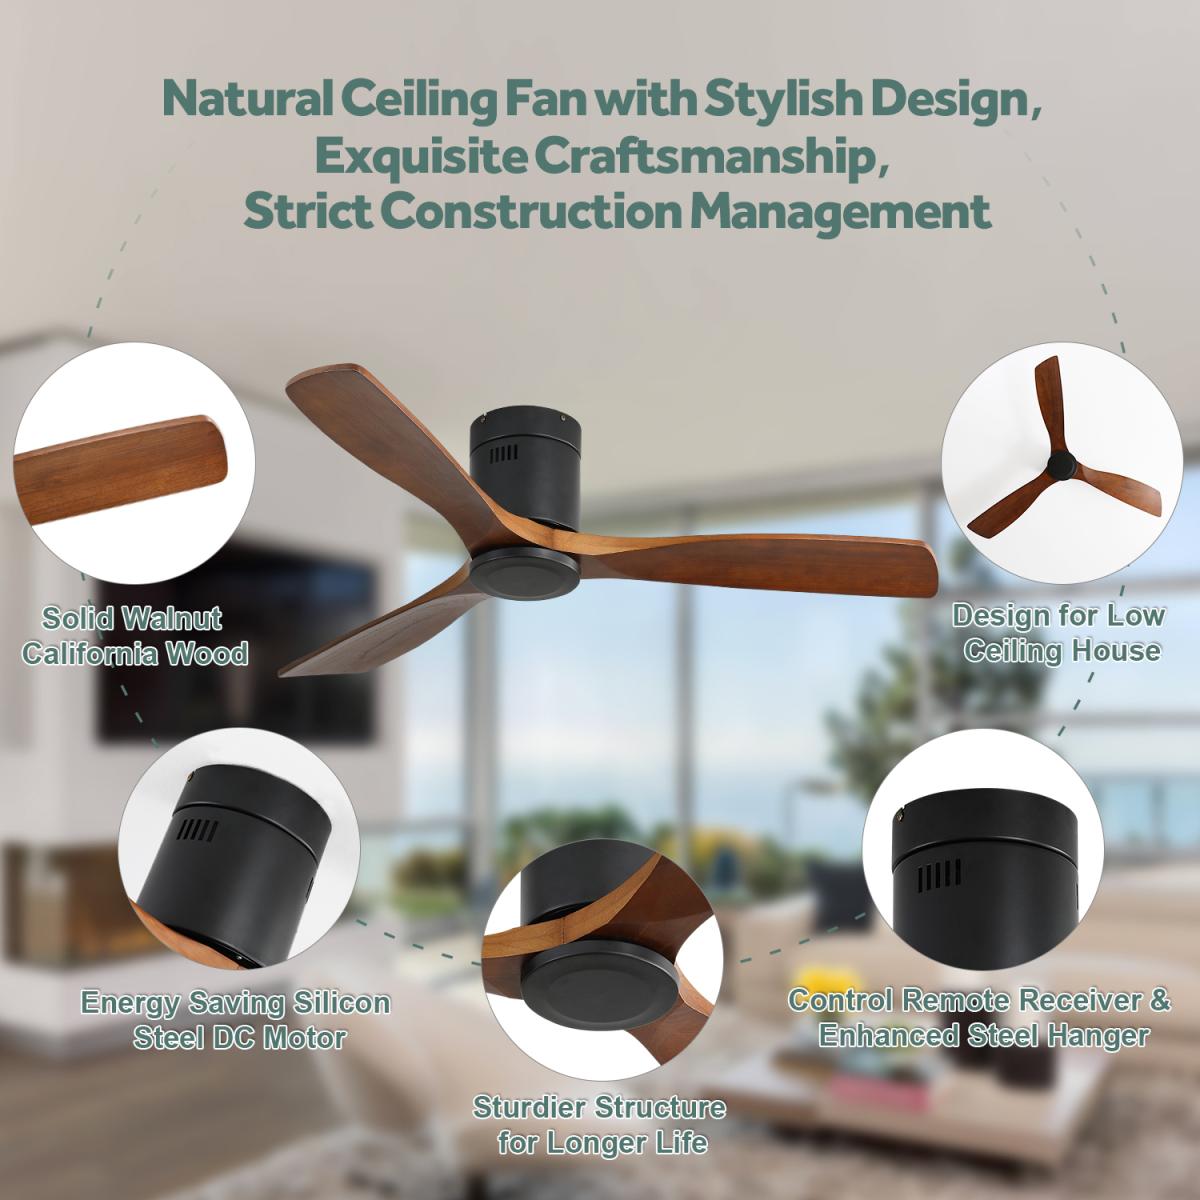 52 Inch Low Profile Ceiling Fan Dc 3 Carved Wood Fan Blade Noiseless Reversible Motor Remote Control Without Light